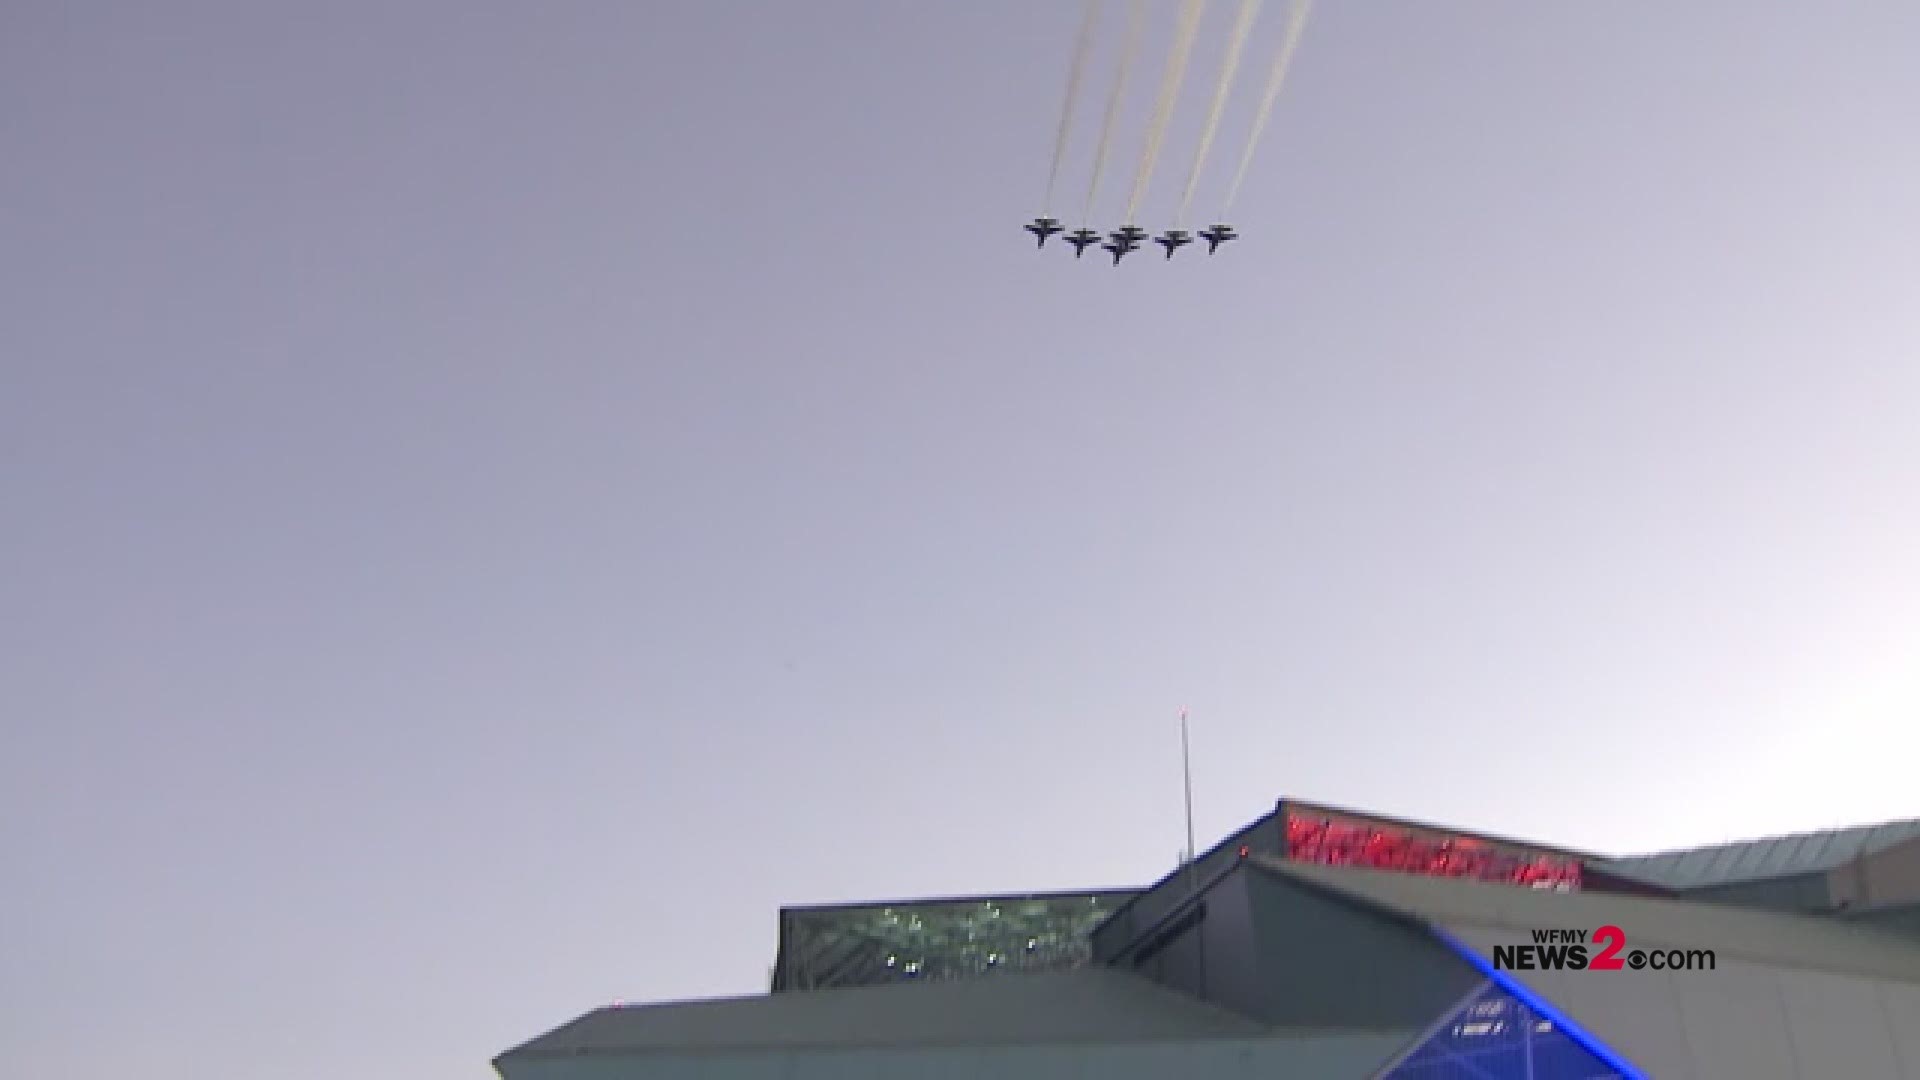 Amazing! Fighter jets fly over Mercedes-Benz Stadium in Atlanta before kickoff of Super Bowl 53!